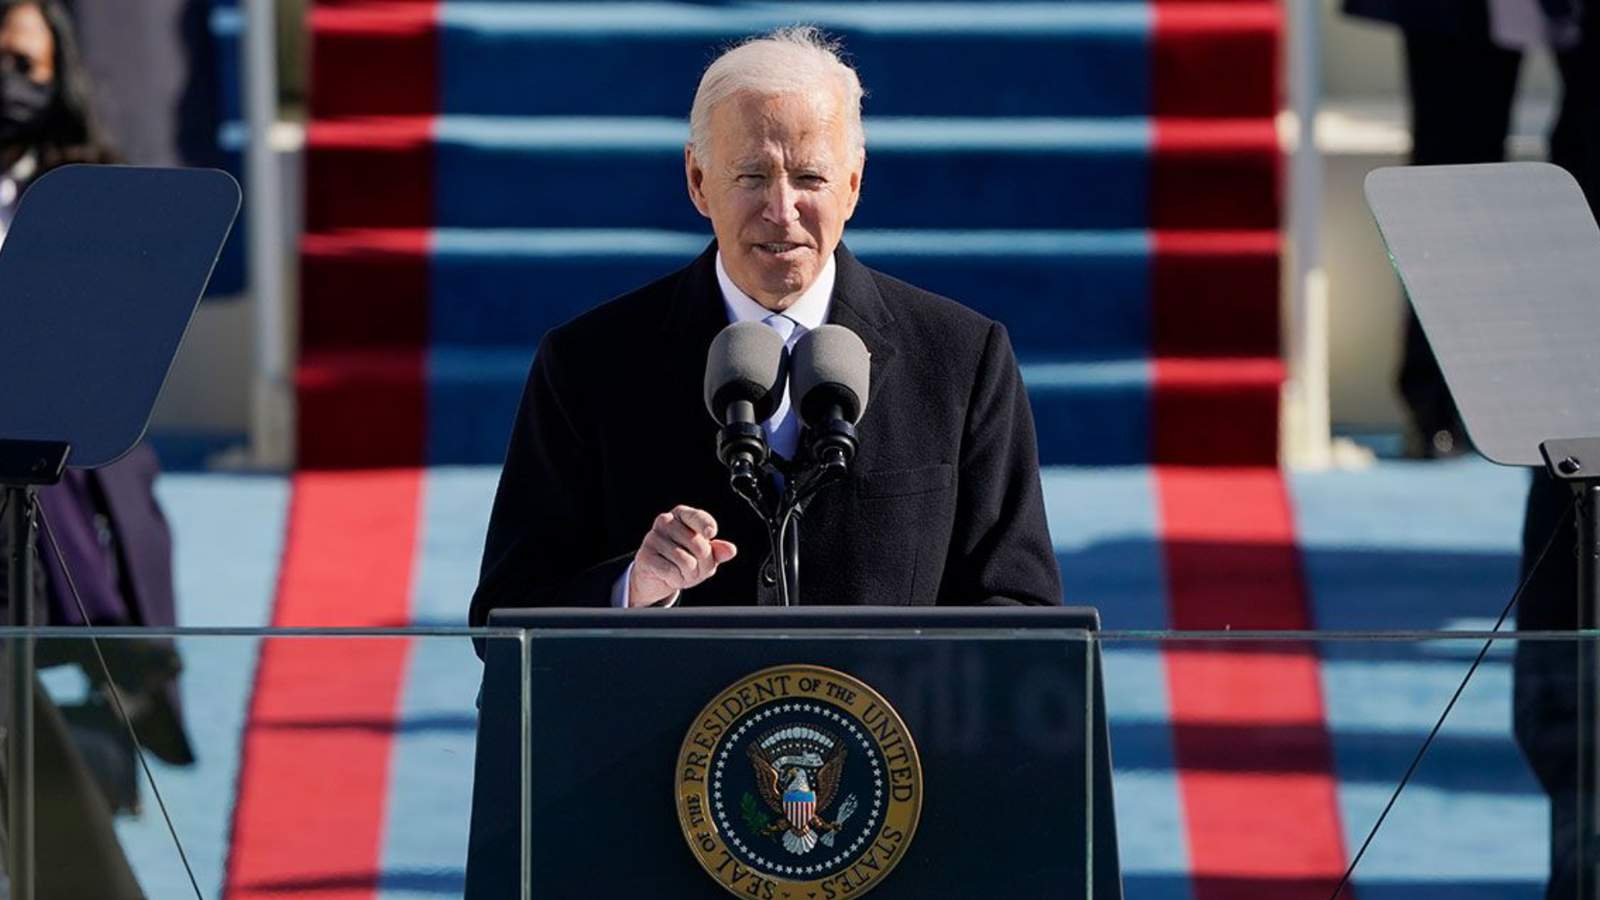 ‘My whole soul is in it’: Read Biden’s inaugural address as the 46th president